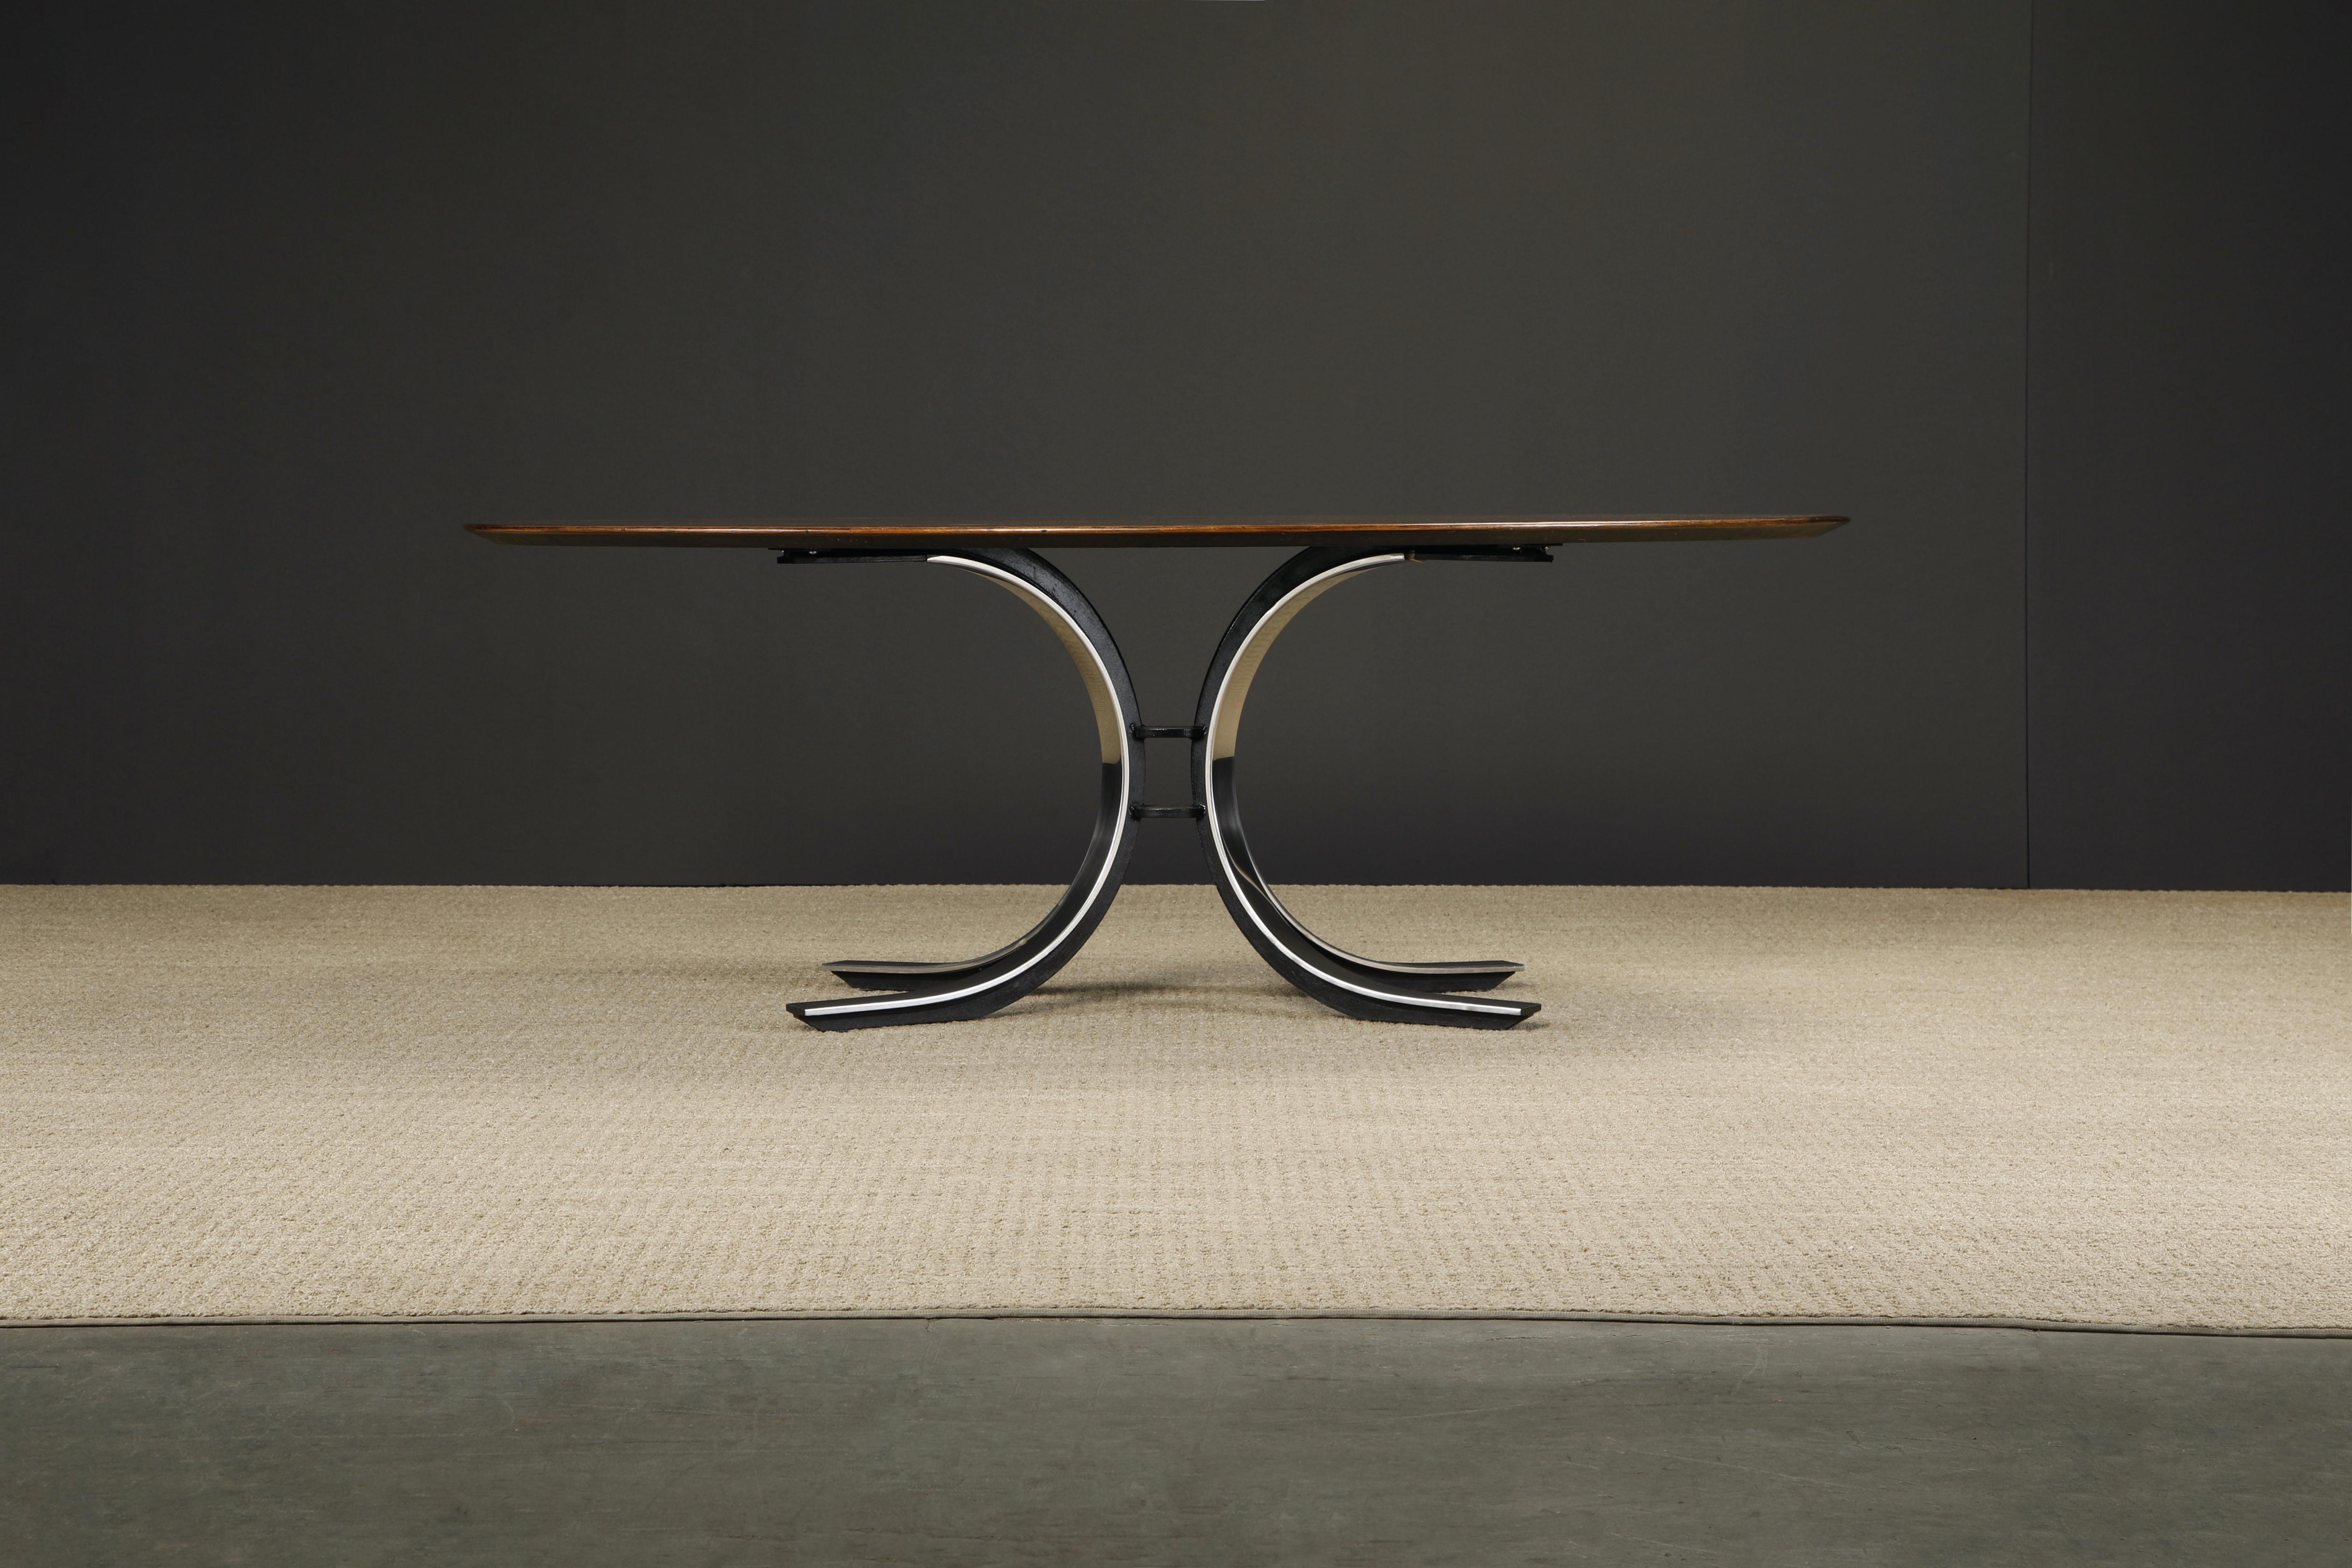 This beautiful dining table by Osvaldo Borsani for Stow Davis, circa 1970, features a beautiful oval top in starburst walnut over a heavy contrasting polished and black enameled steel tulip base. 

Consider using this Stow Davis dining table,